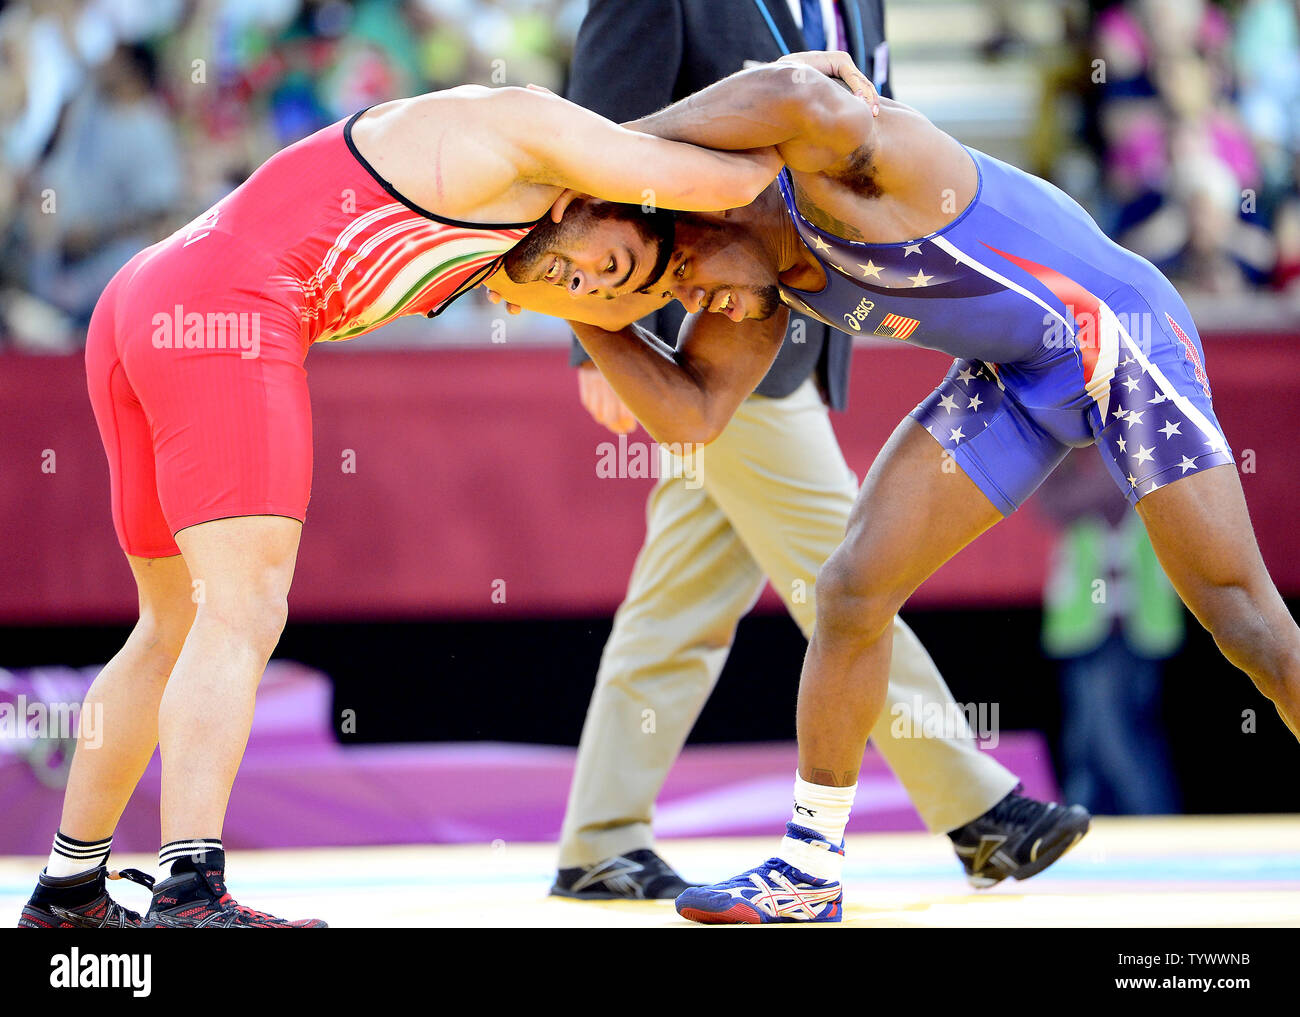 Jordan Ernest Burroughs of the United States of America, right, competes for a Gold Medal with Sadegh Saeed Goudarzi of Iran, left, in the Men's 74kg Freestyle Wrestling at the London 2012 Summer Olympics on August 10, 2012 in London. Burroughs won the match and the Gold.   UPI/Ron Sachs Stock Photo